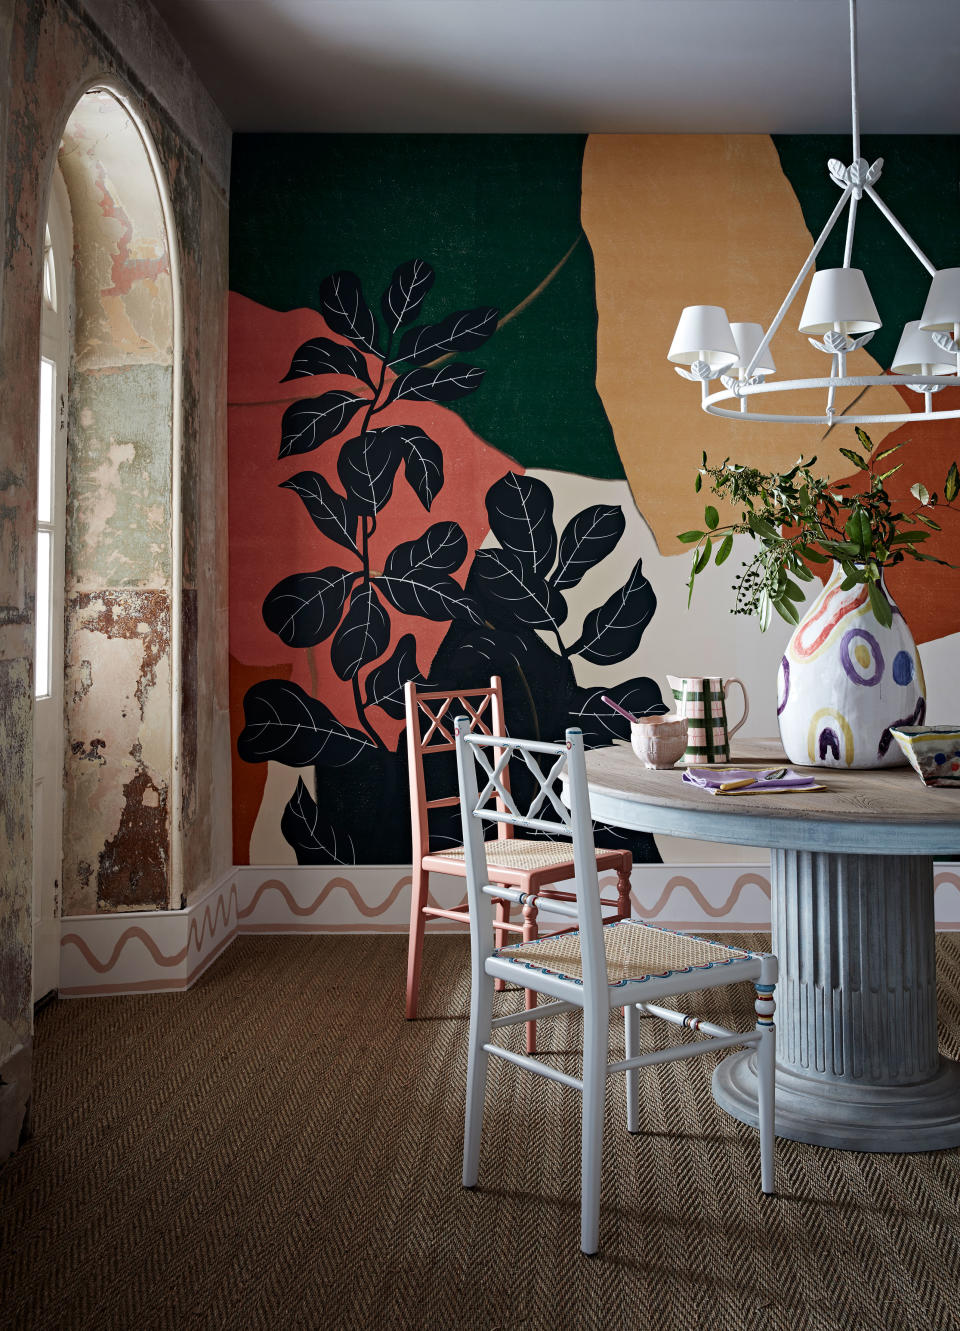 <p> If you are considering really stand-out&#xA0;dining room color schemes, you can introduce contrast with painted furniture. </p> <p> &apos;We chose this extraordinary hand-painted wallcovering design by&#xA0;Fromental&#xA0;for one of our decorating shoots and wanted to add an element of surprise to the dining room set with an unexpected accent color,&apos; says Emma Thomas,&#xA0;<em>Homes &amp; Gardens</em>&apos; Decorating Editor. &apos;We felt this pale blue on the table pedestal and dining chair, plus the salmon pink were perfect opposites for the deeper, bolder colors on the wall. This same effect could be achieved with painted furniture ideas.&apos; </p>